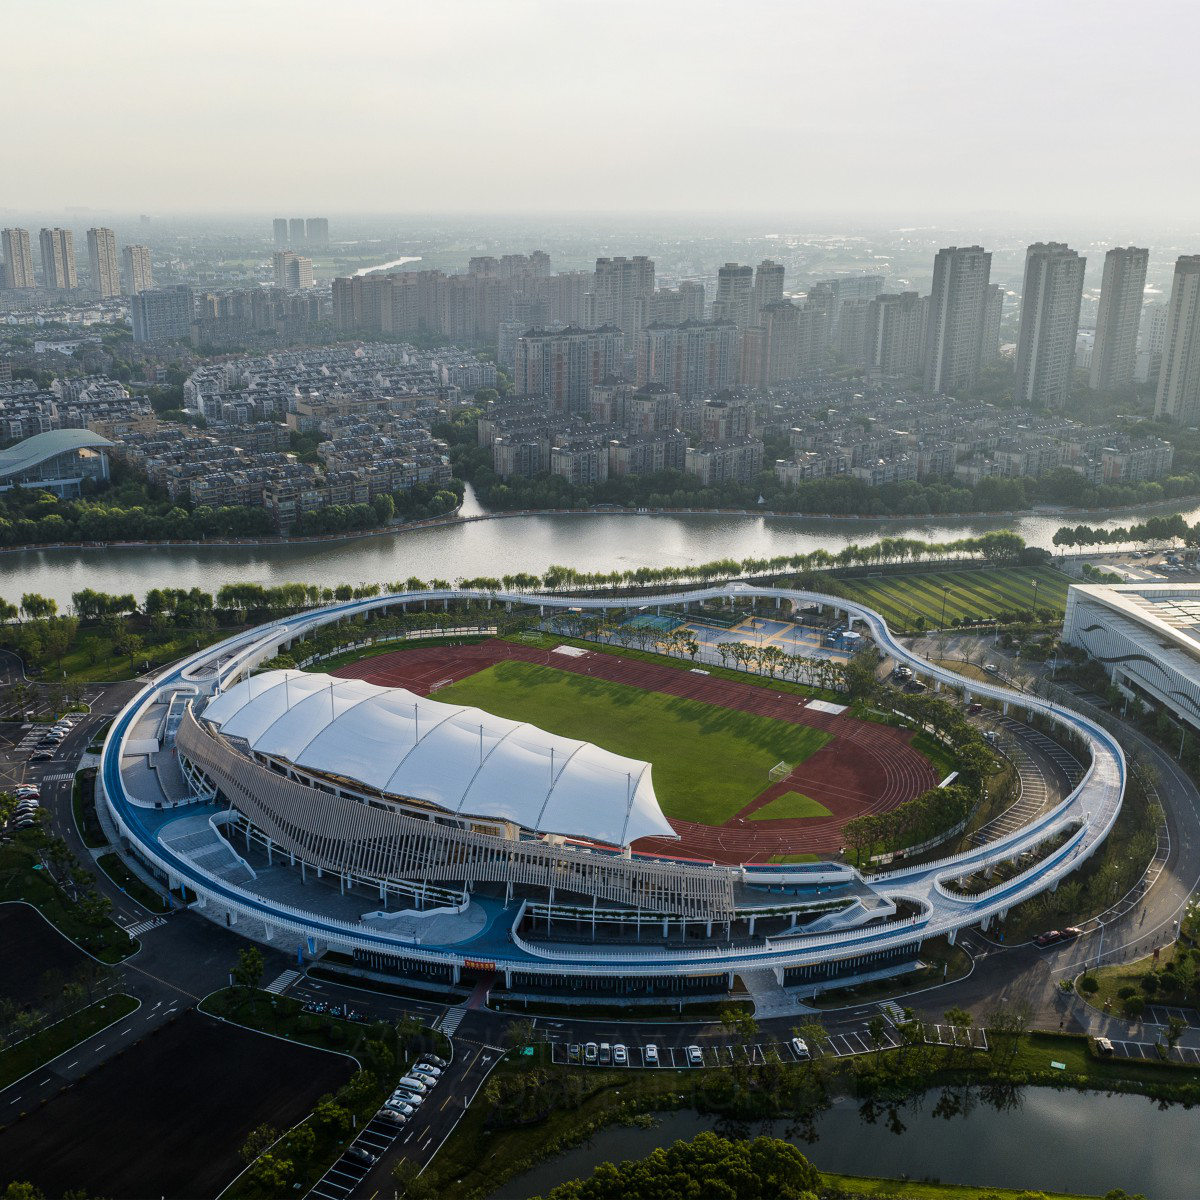 FREDERIC ROLLAND ARCHITECTURE wins Golden at the prestigious A' Architecture, Building and Structure Design Award with Zhejiang Pinghu Sports Center.